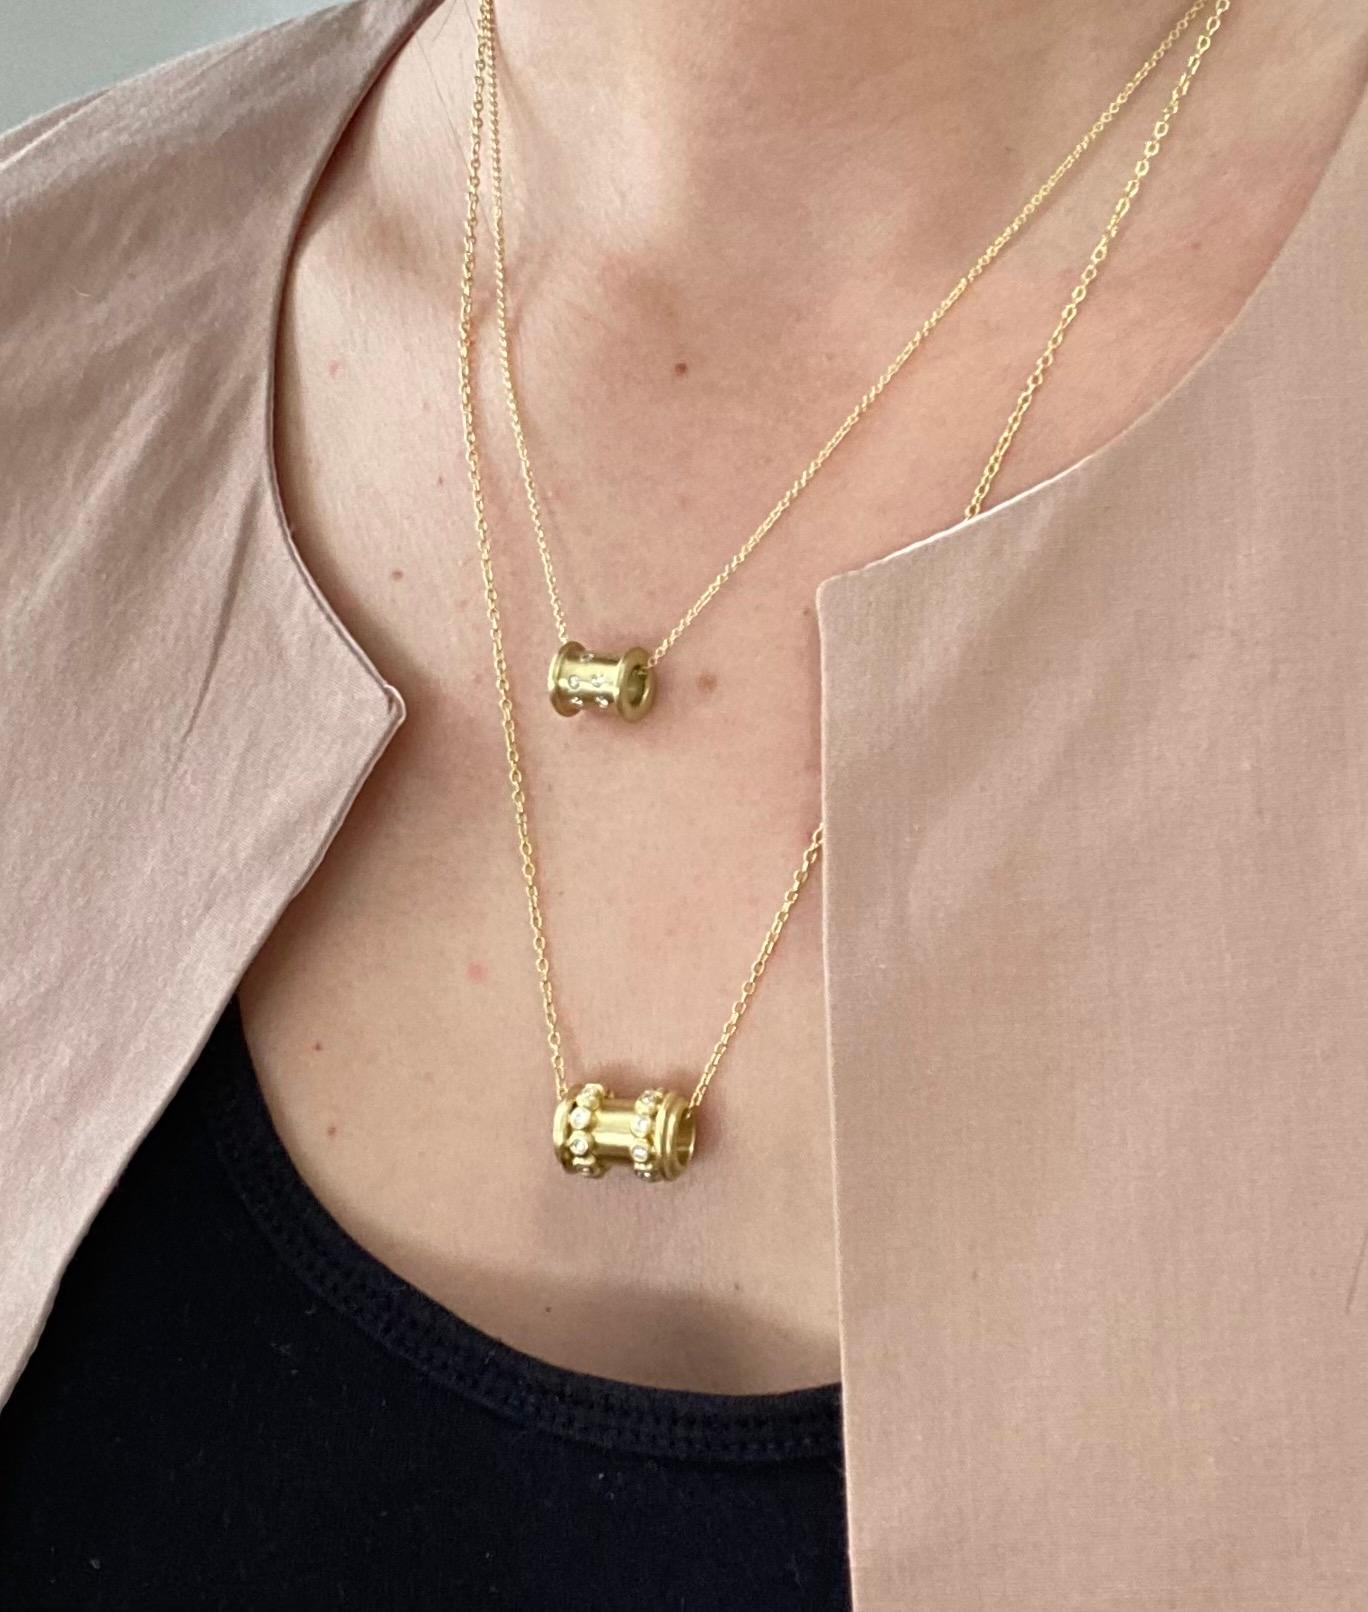 This sparkly and slightly chunky 18K gold* diamond granulation spool charm and chain will dress up even the most casual outfit and complement more formal attire. Worn alone or paired with other necklaces, this Faye Kim statement piece, with 20